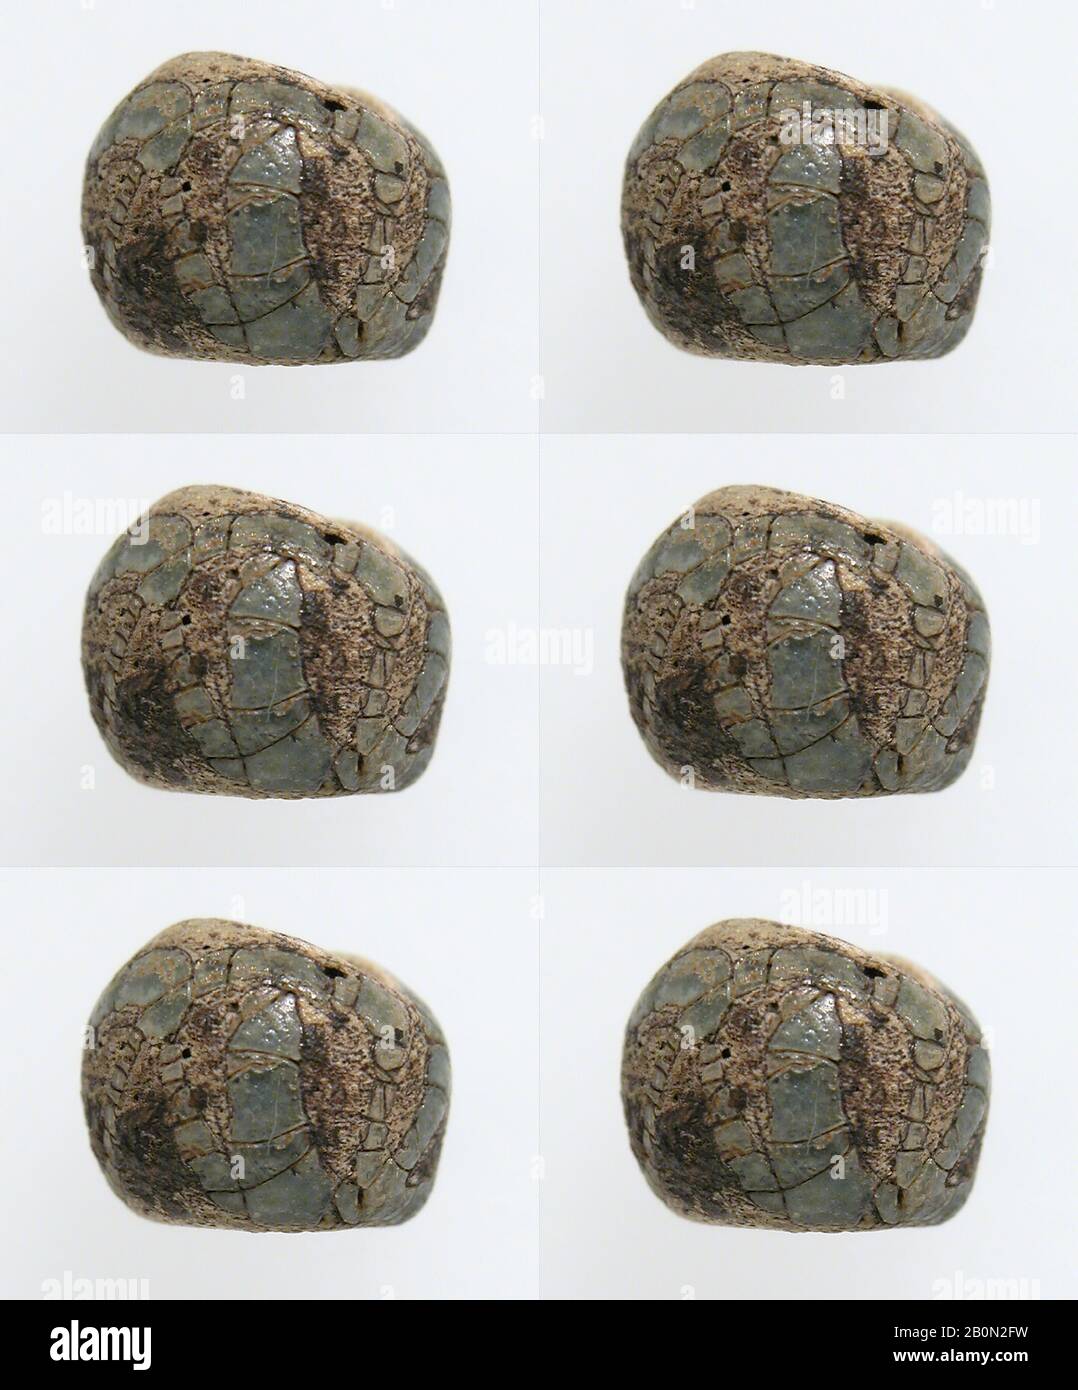 Small Bead, Frankish, 500–600, Frankish, Glass, Overall: 3/16 x 1/4 in. (0.5 x 0.7 cm), Glass-Beads Stock Photo